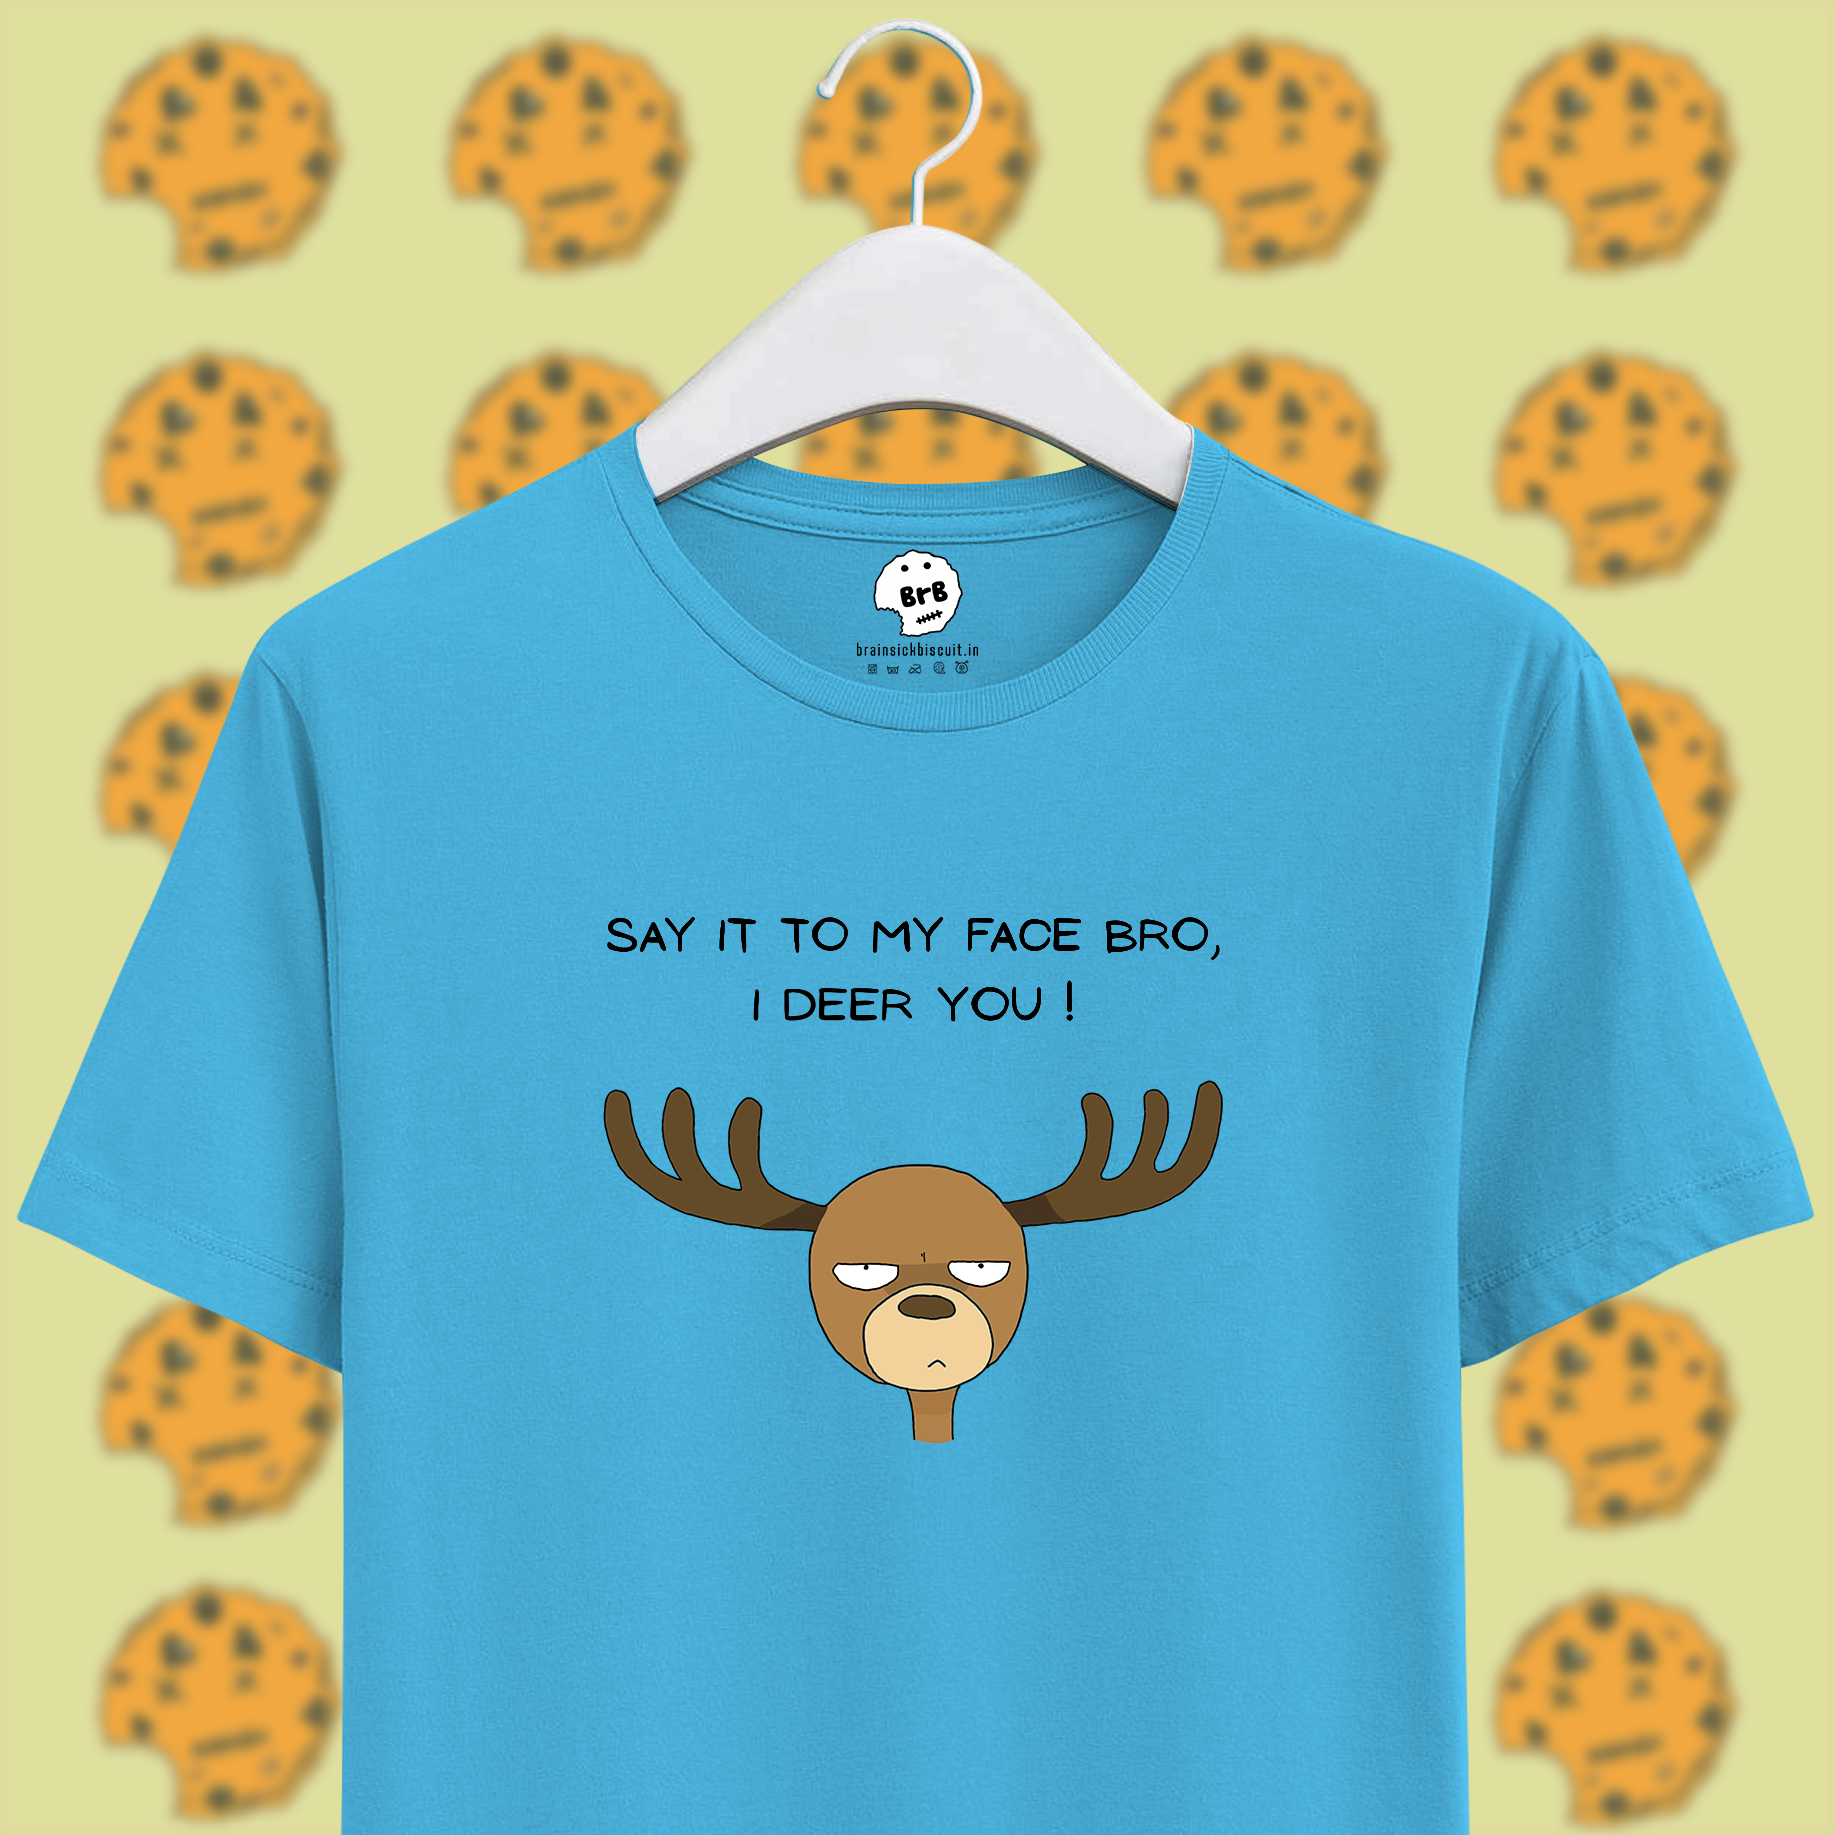 deer pun with say it to my face bro, i deer you text on unisex sky blue half sleeves t-shirt.